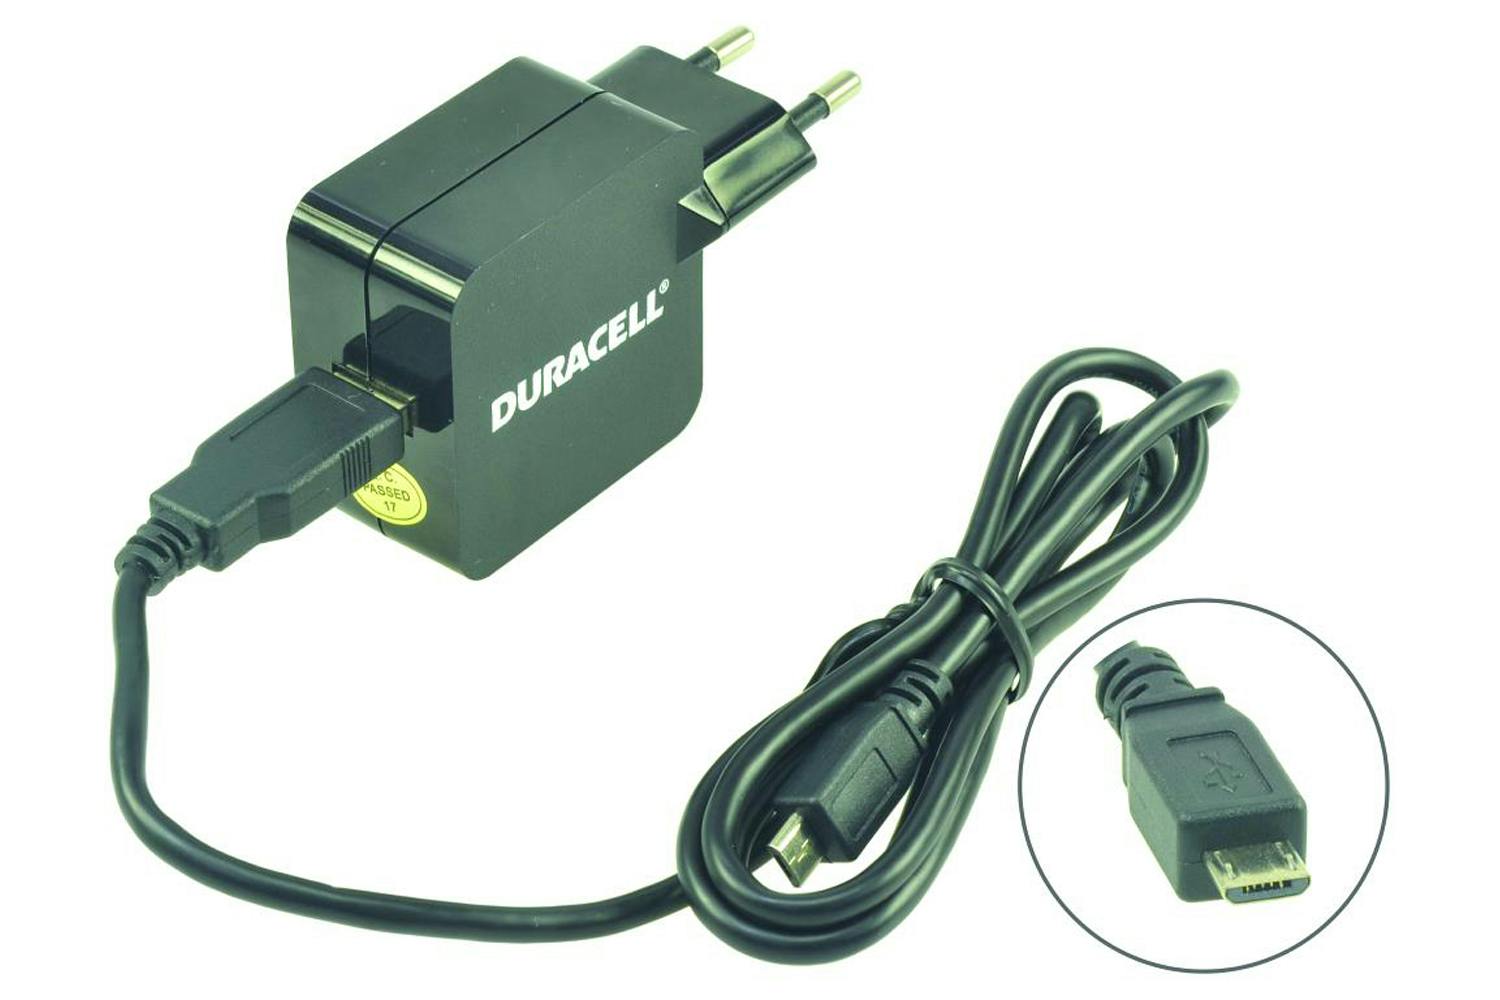 Duracell Duracell 2.4A Phone/Tablet Wall Charger